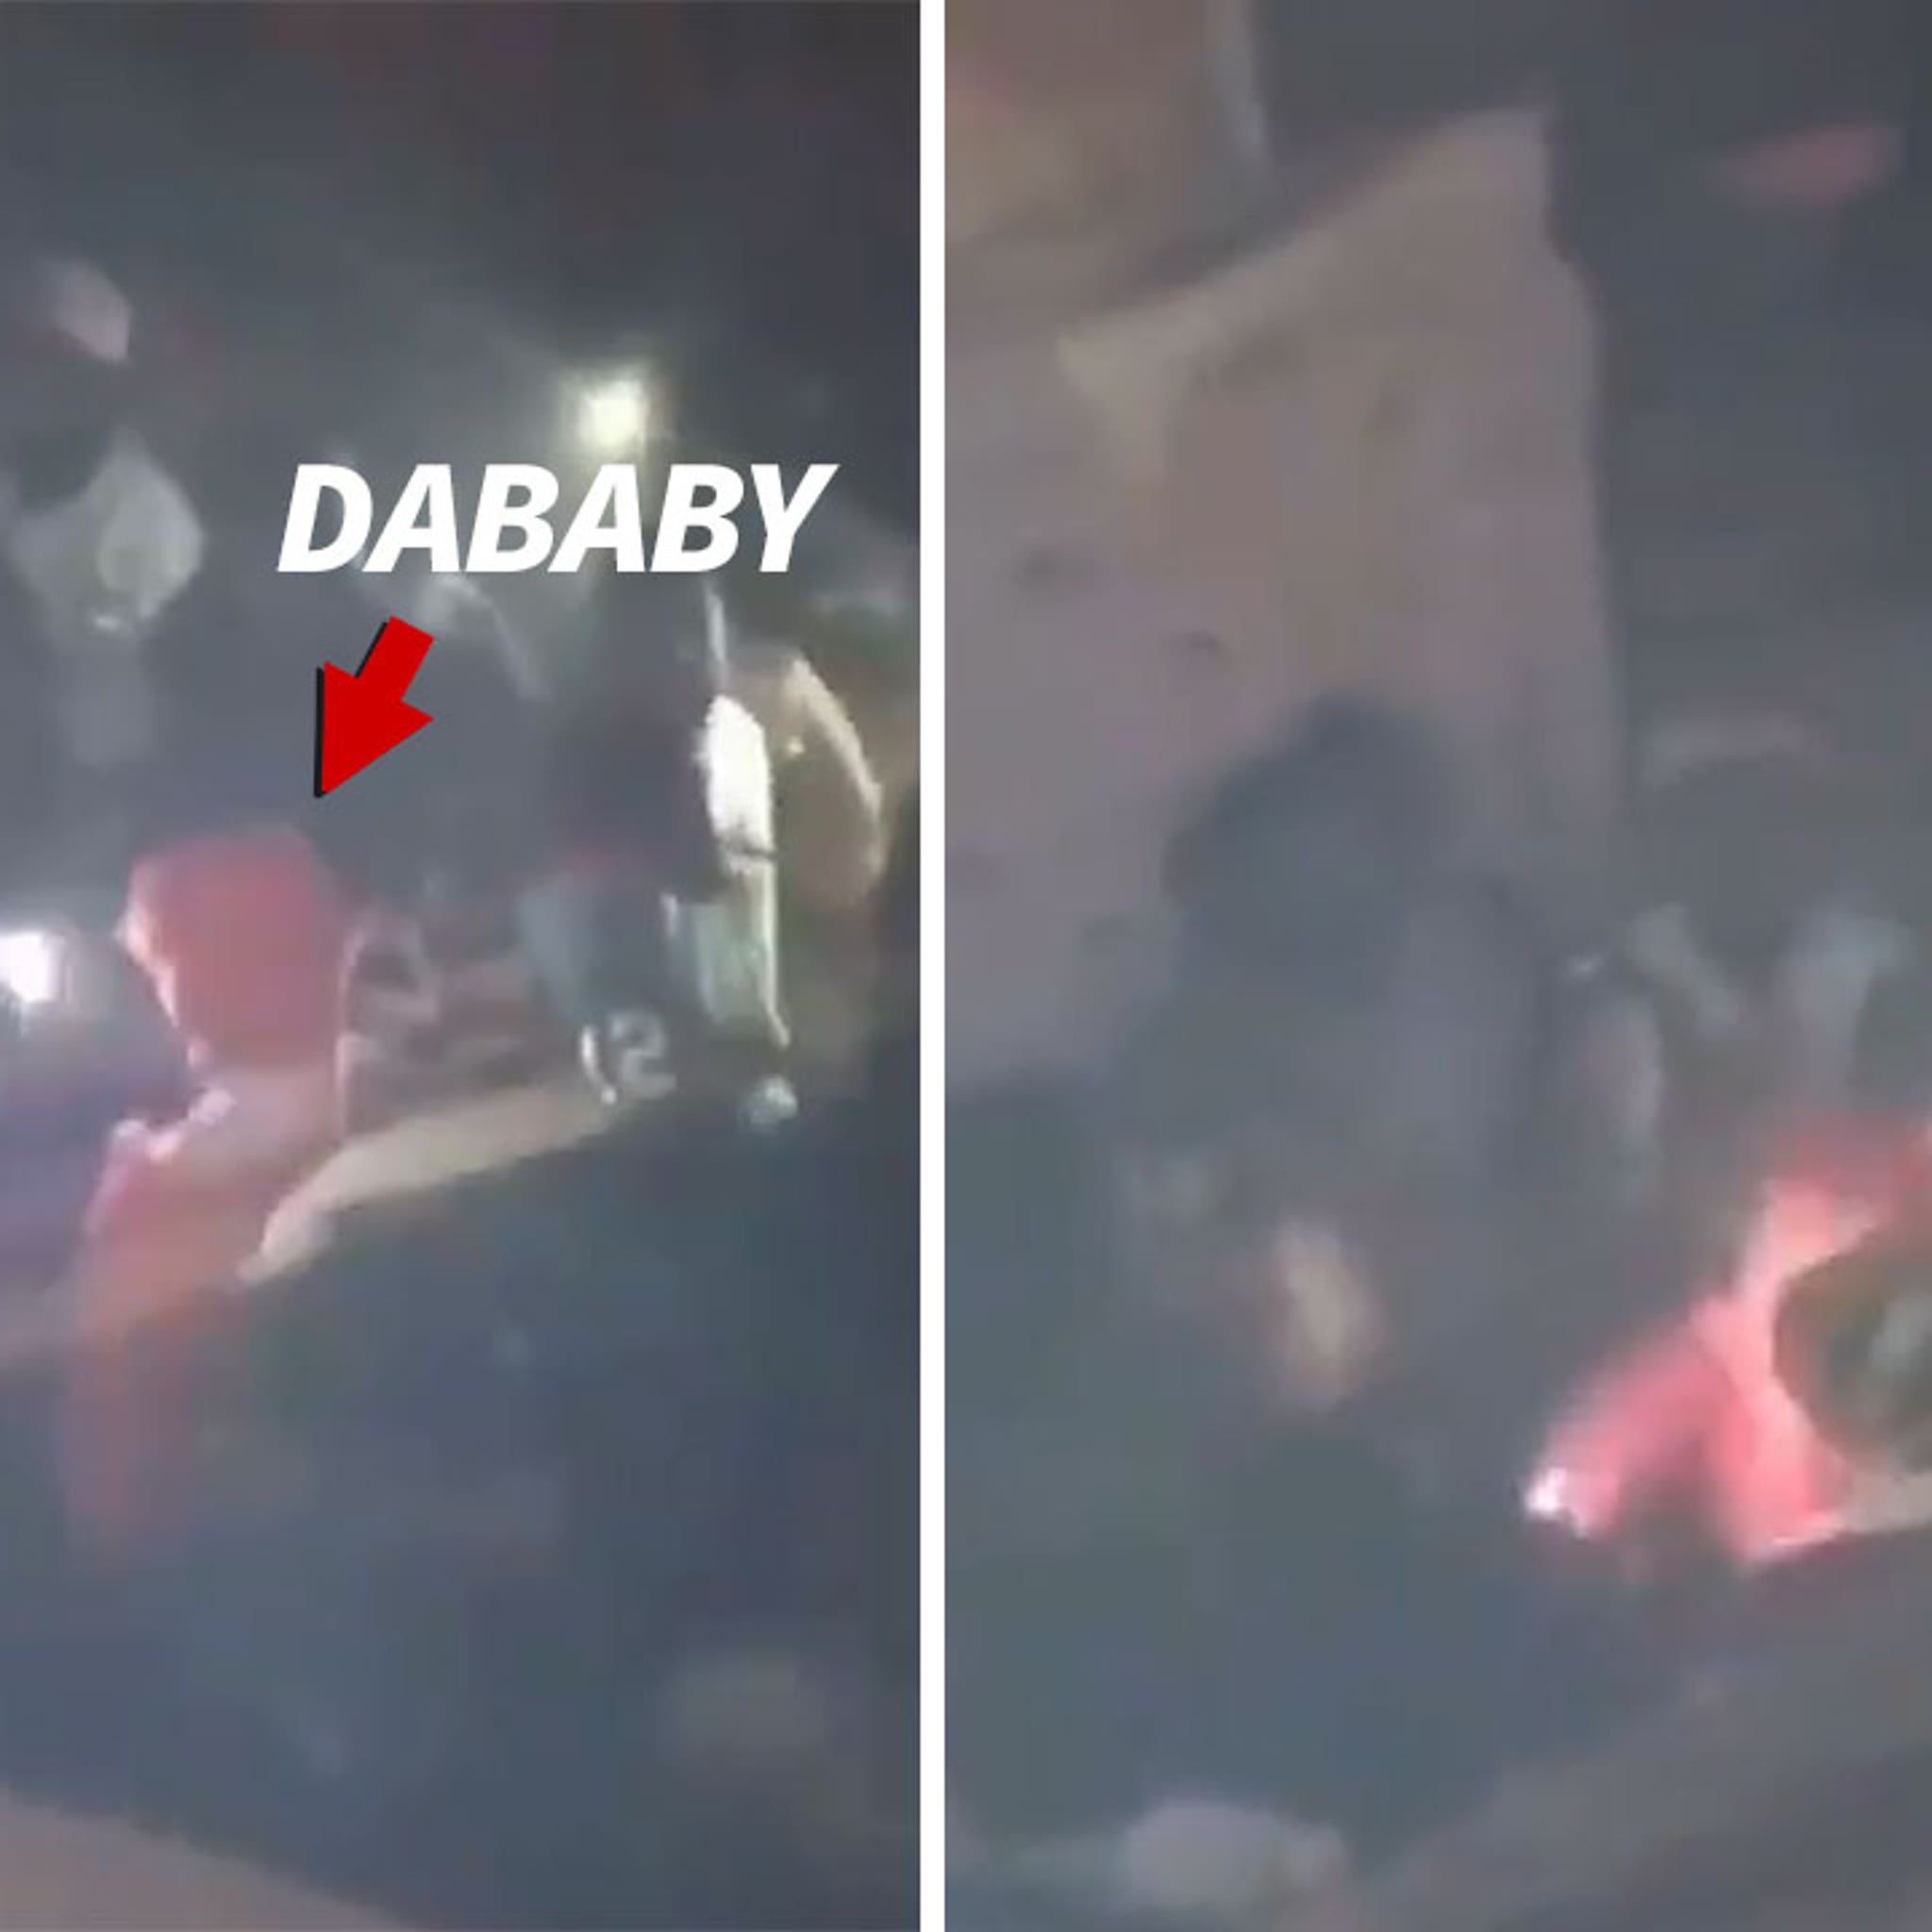 Dababy Apologizes For Viciously Slapping Woman In The Face